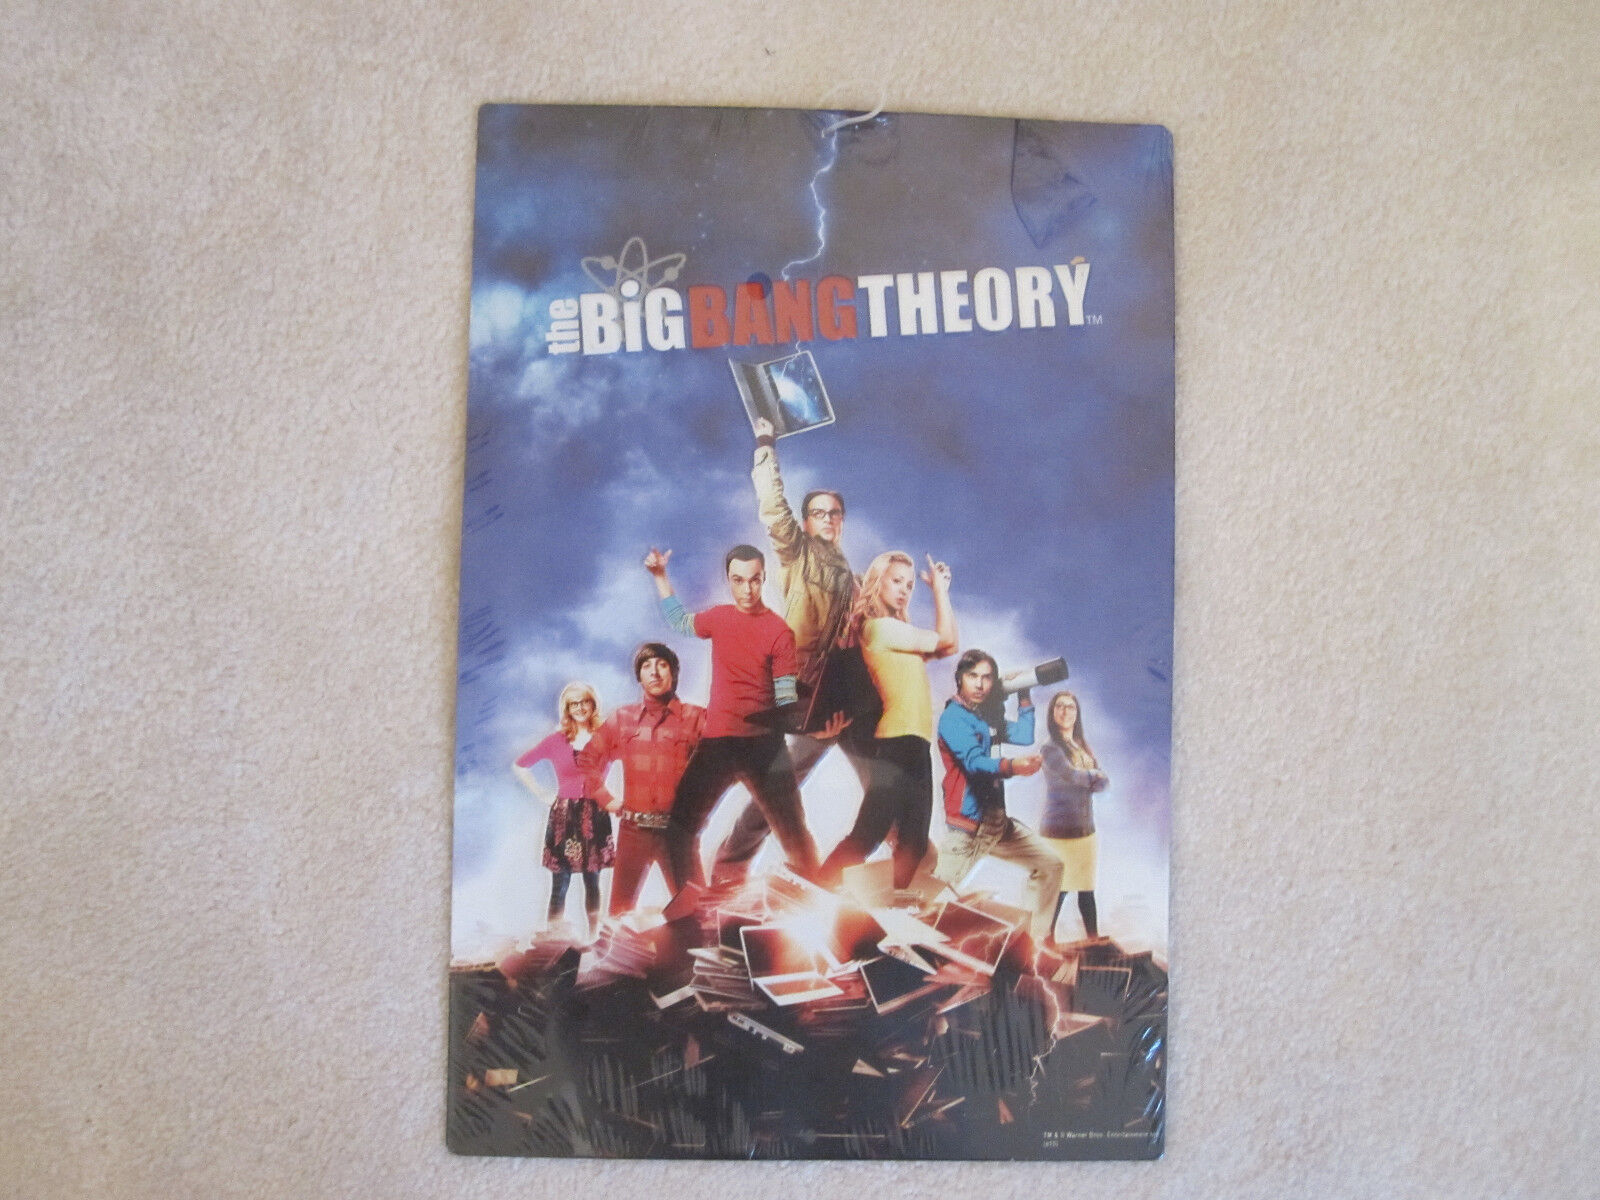 the BiG BANG THEORY Embossed Metal Sign MENSA Physicist CALTECH Quantum Physics